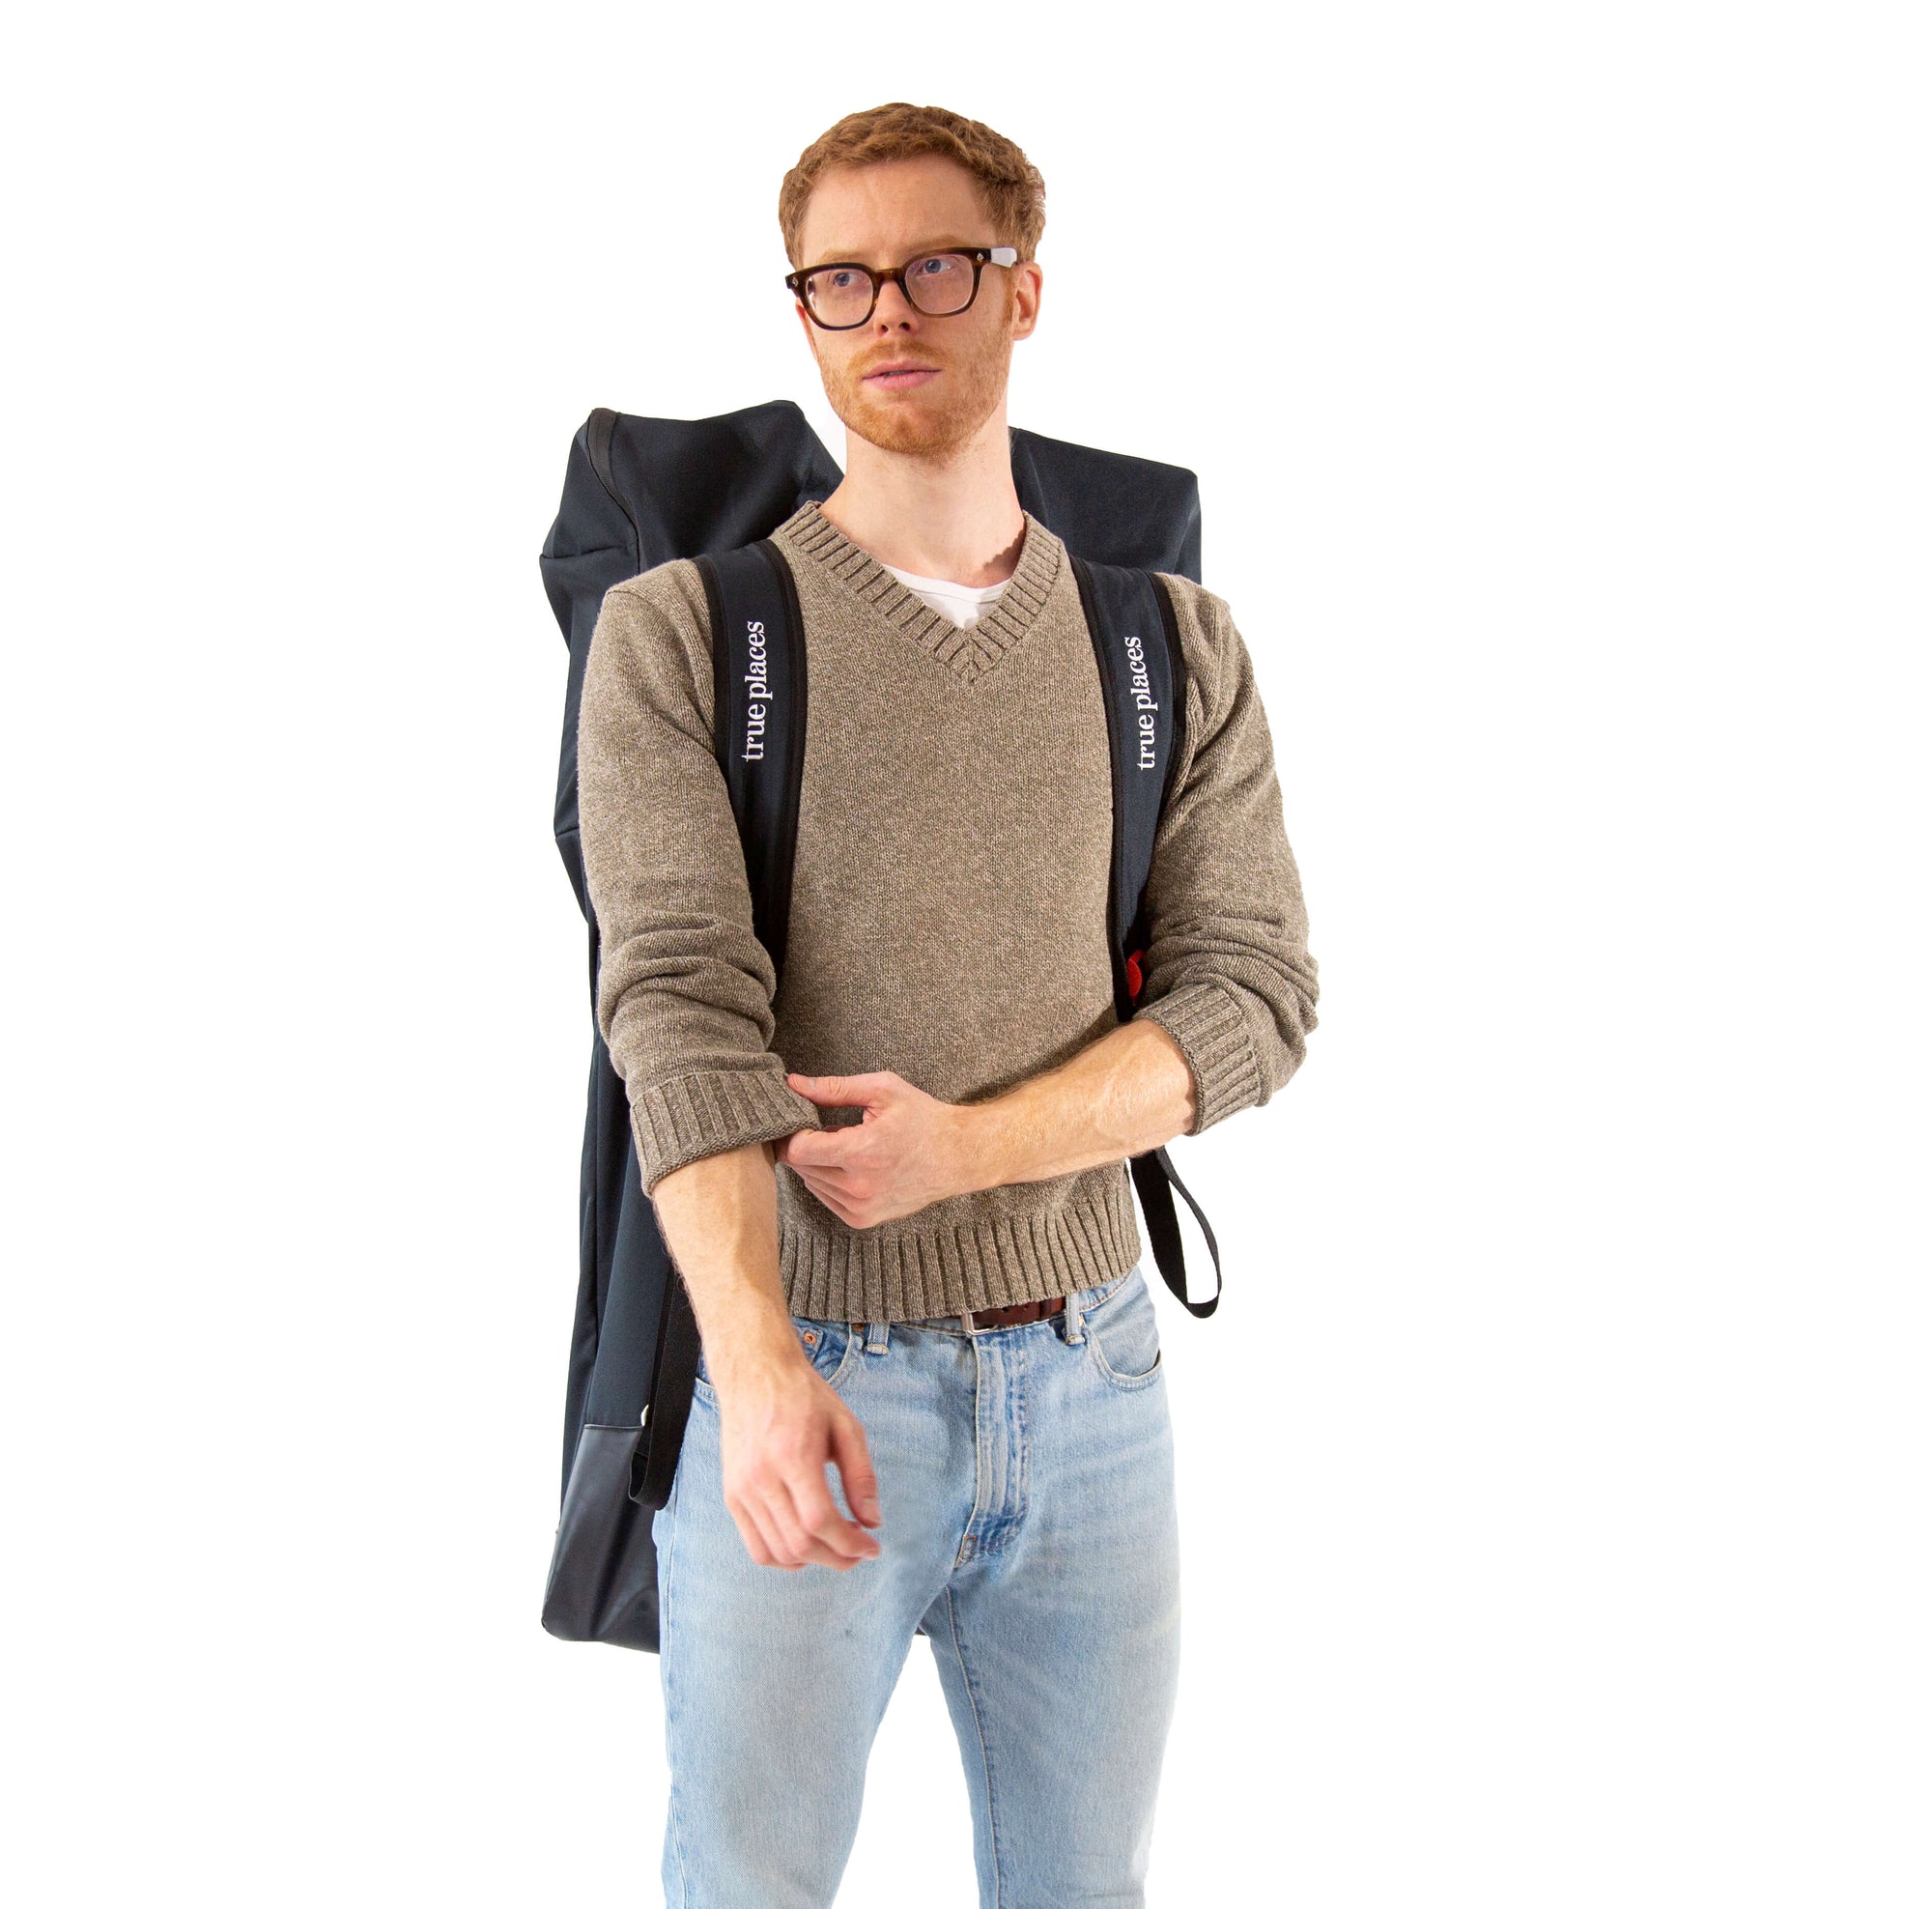 Carry 2 Emmett chairs backpack-style by connecting two Premium Carrying Bags for ultimate handsfree portability